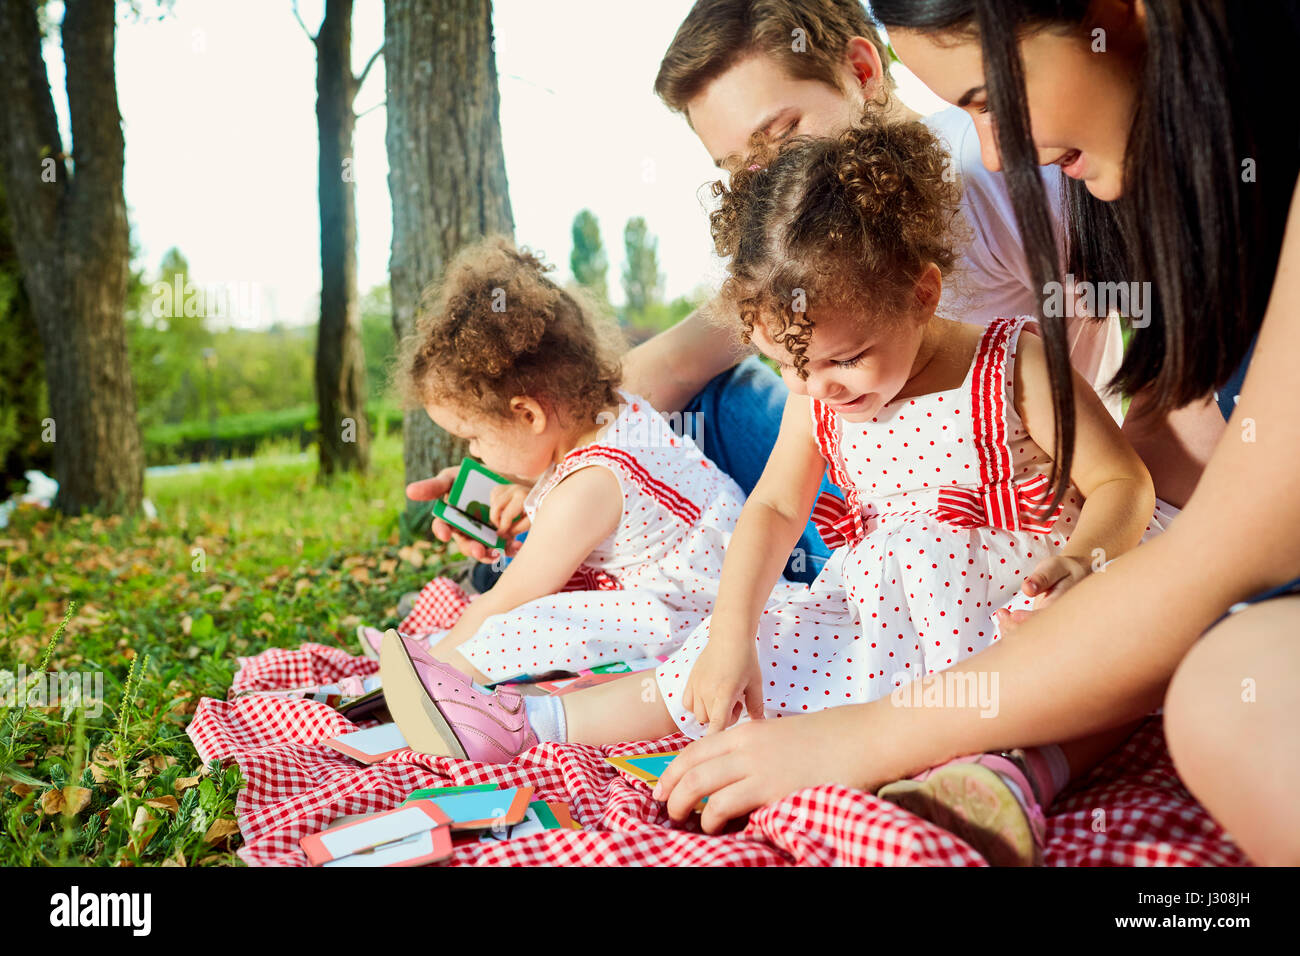 Children and parents play developing games in the park on grass. Stock Photo